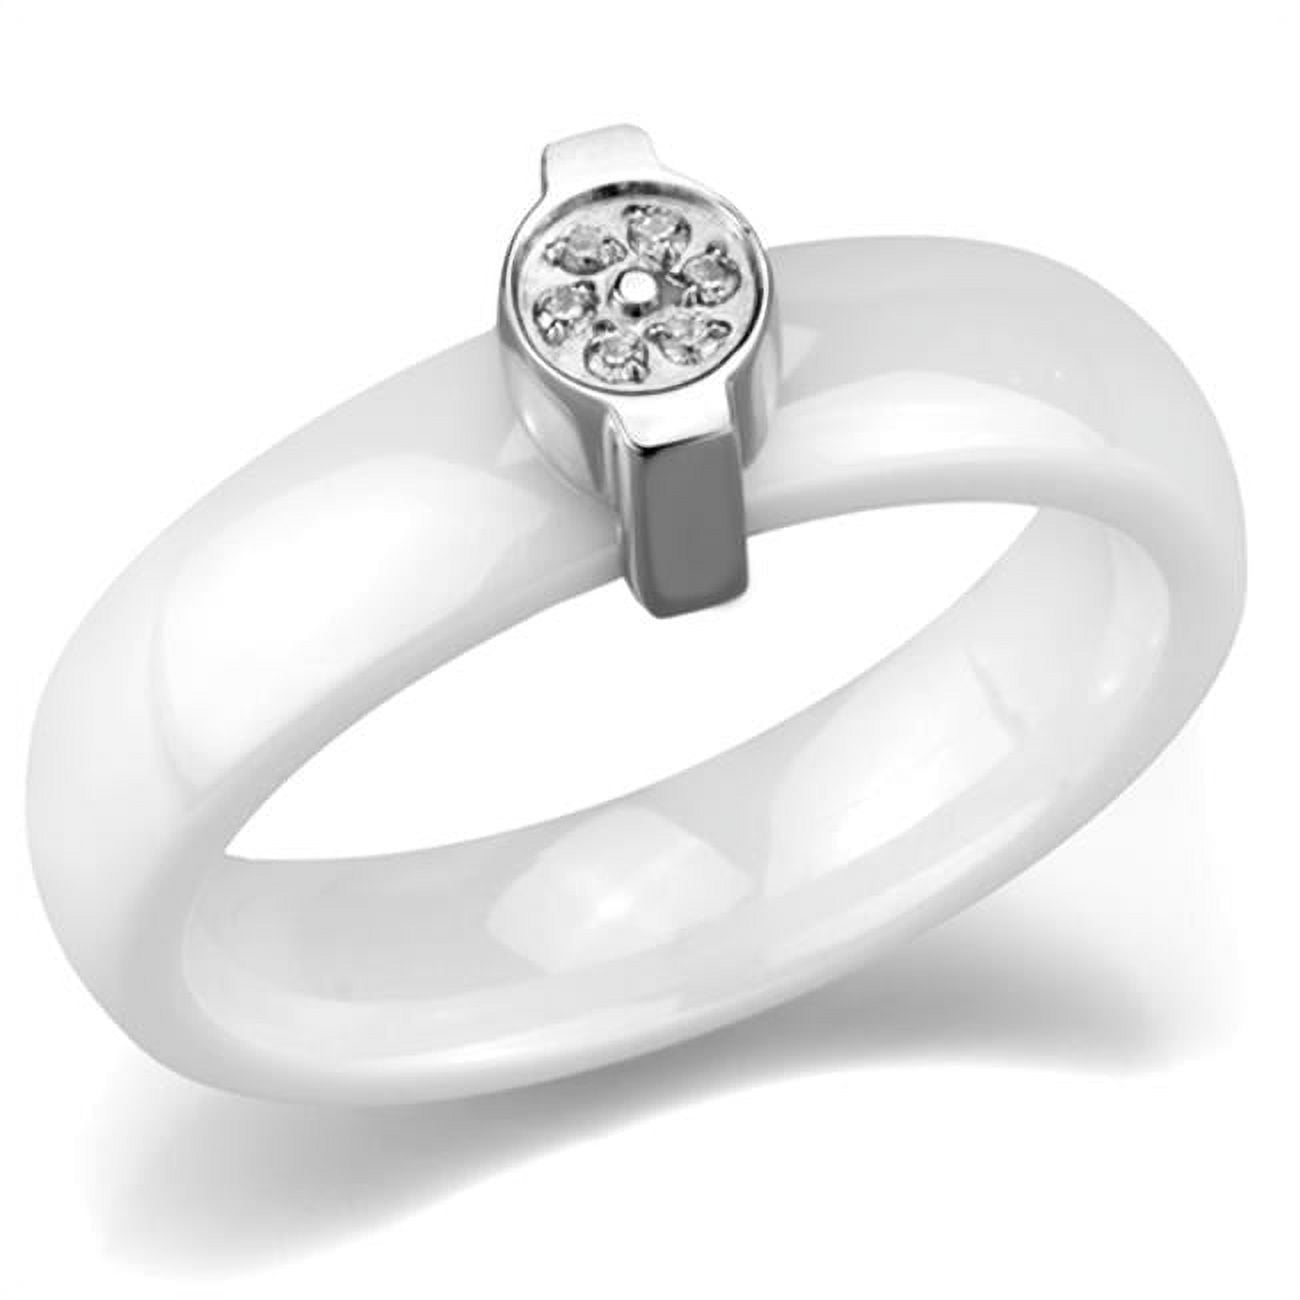 Picture of Alamode 3W958-8 Women High Polished Stainless Steel Ring with Ceramic in White - Size 8